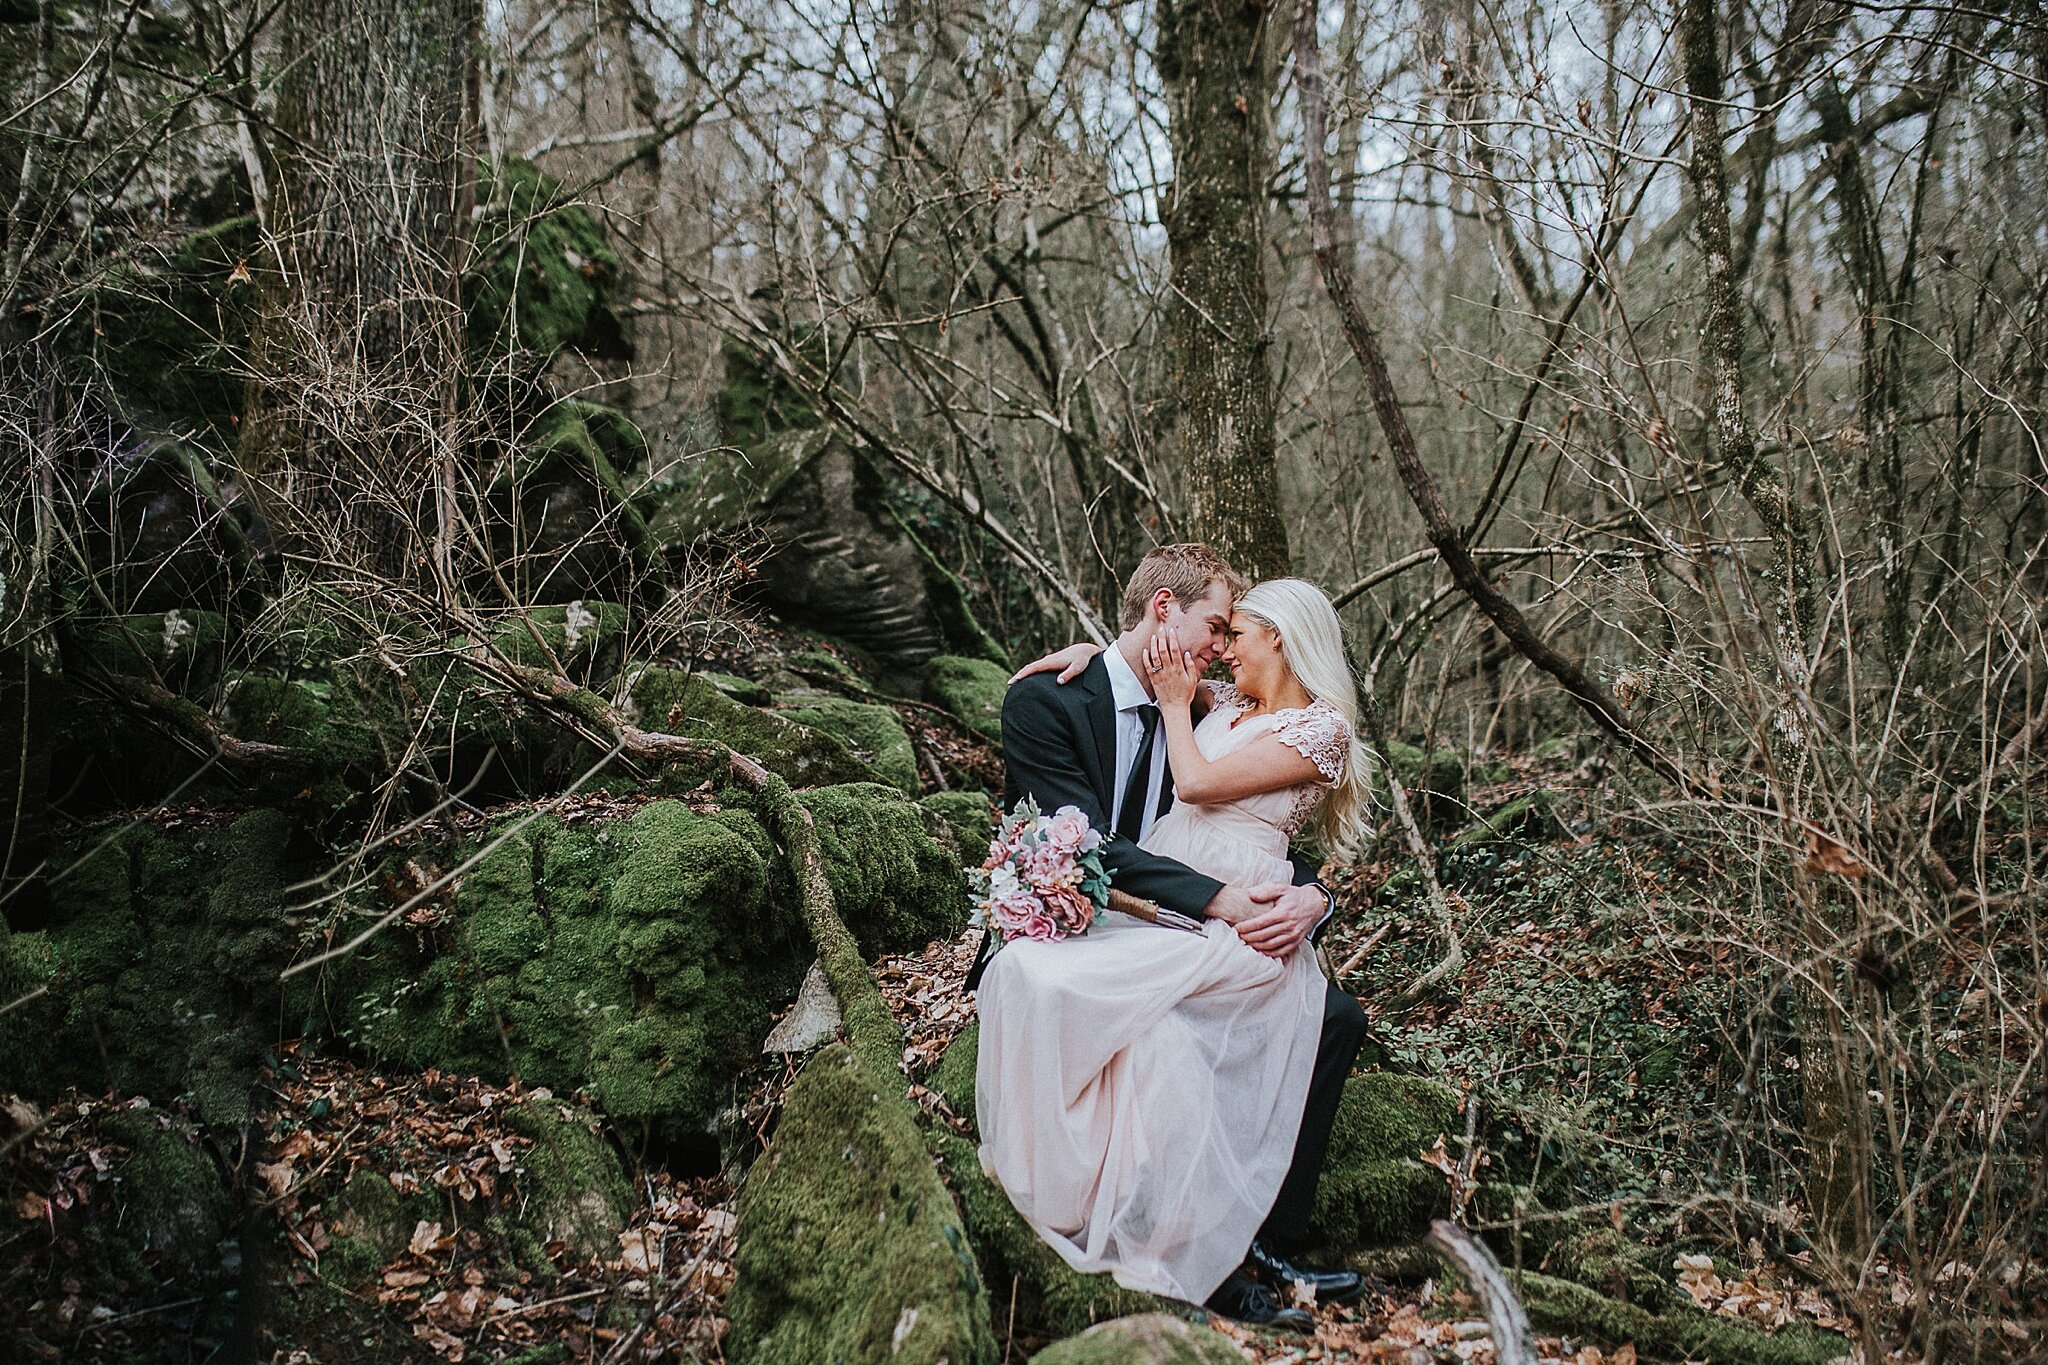 bride sitting on grooms lap with her arms around his neck pullin ghim closer to her face as he holds her around the waist as they sit oon a mossy stone in the woods